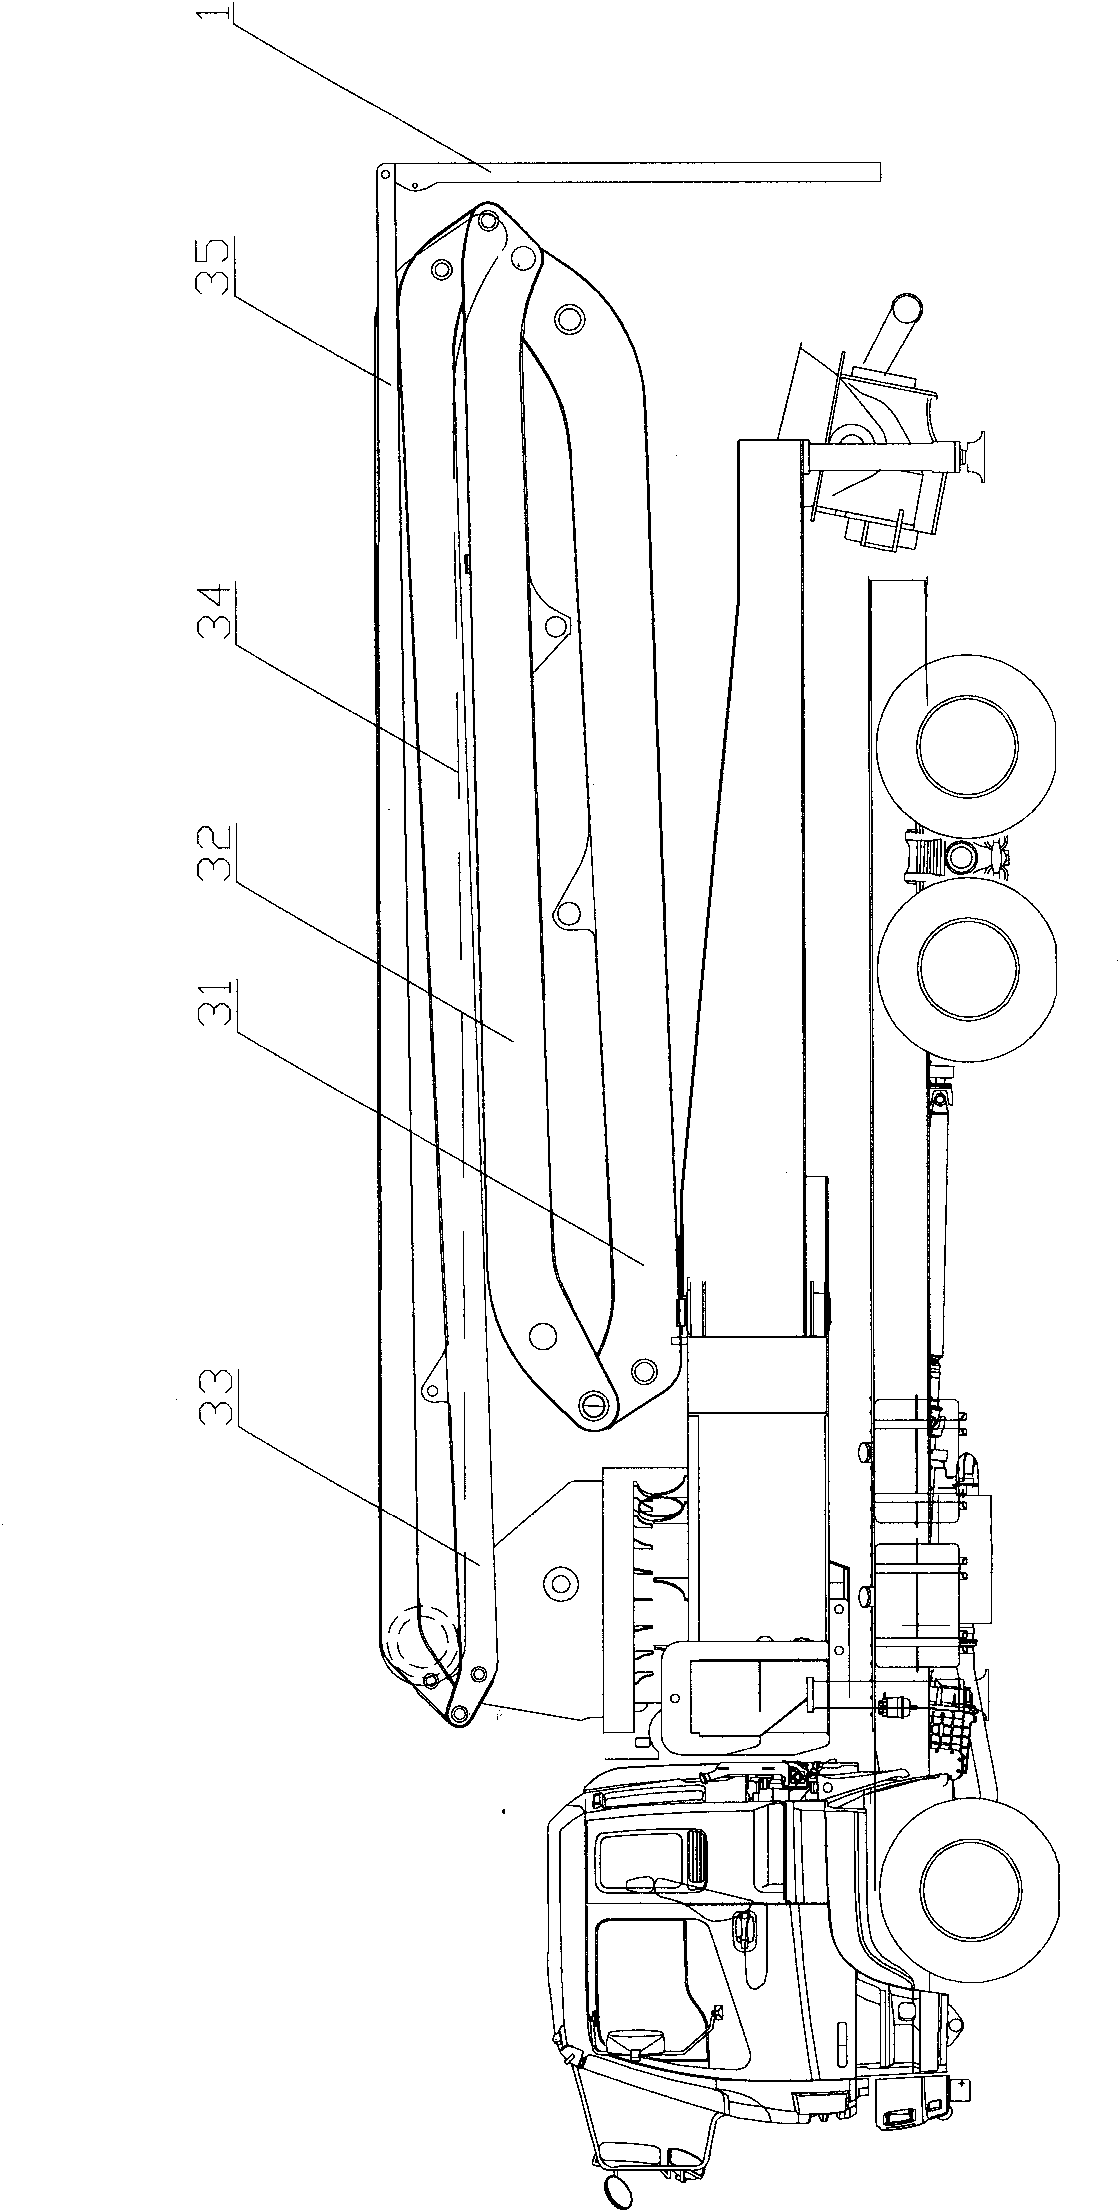 Concrete pump truck and boom device thereof